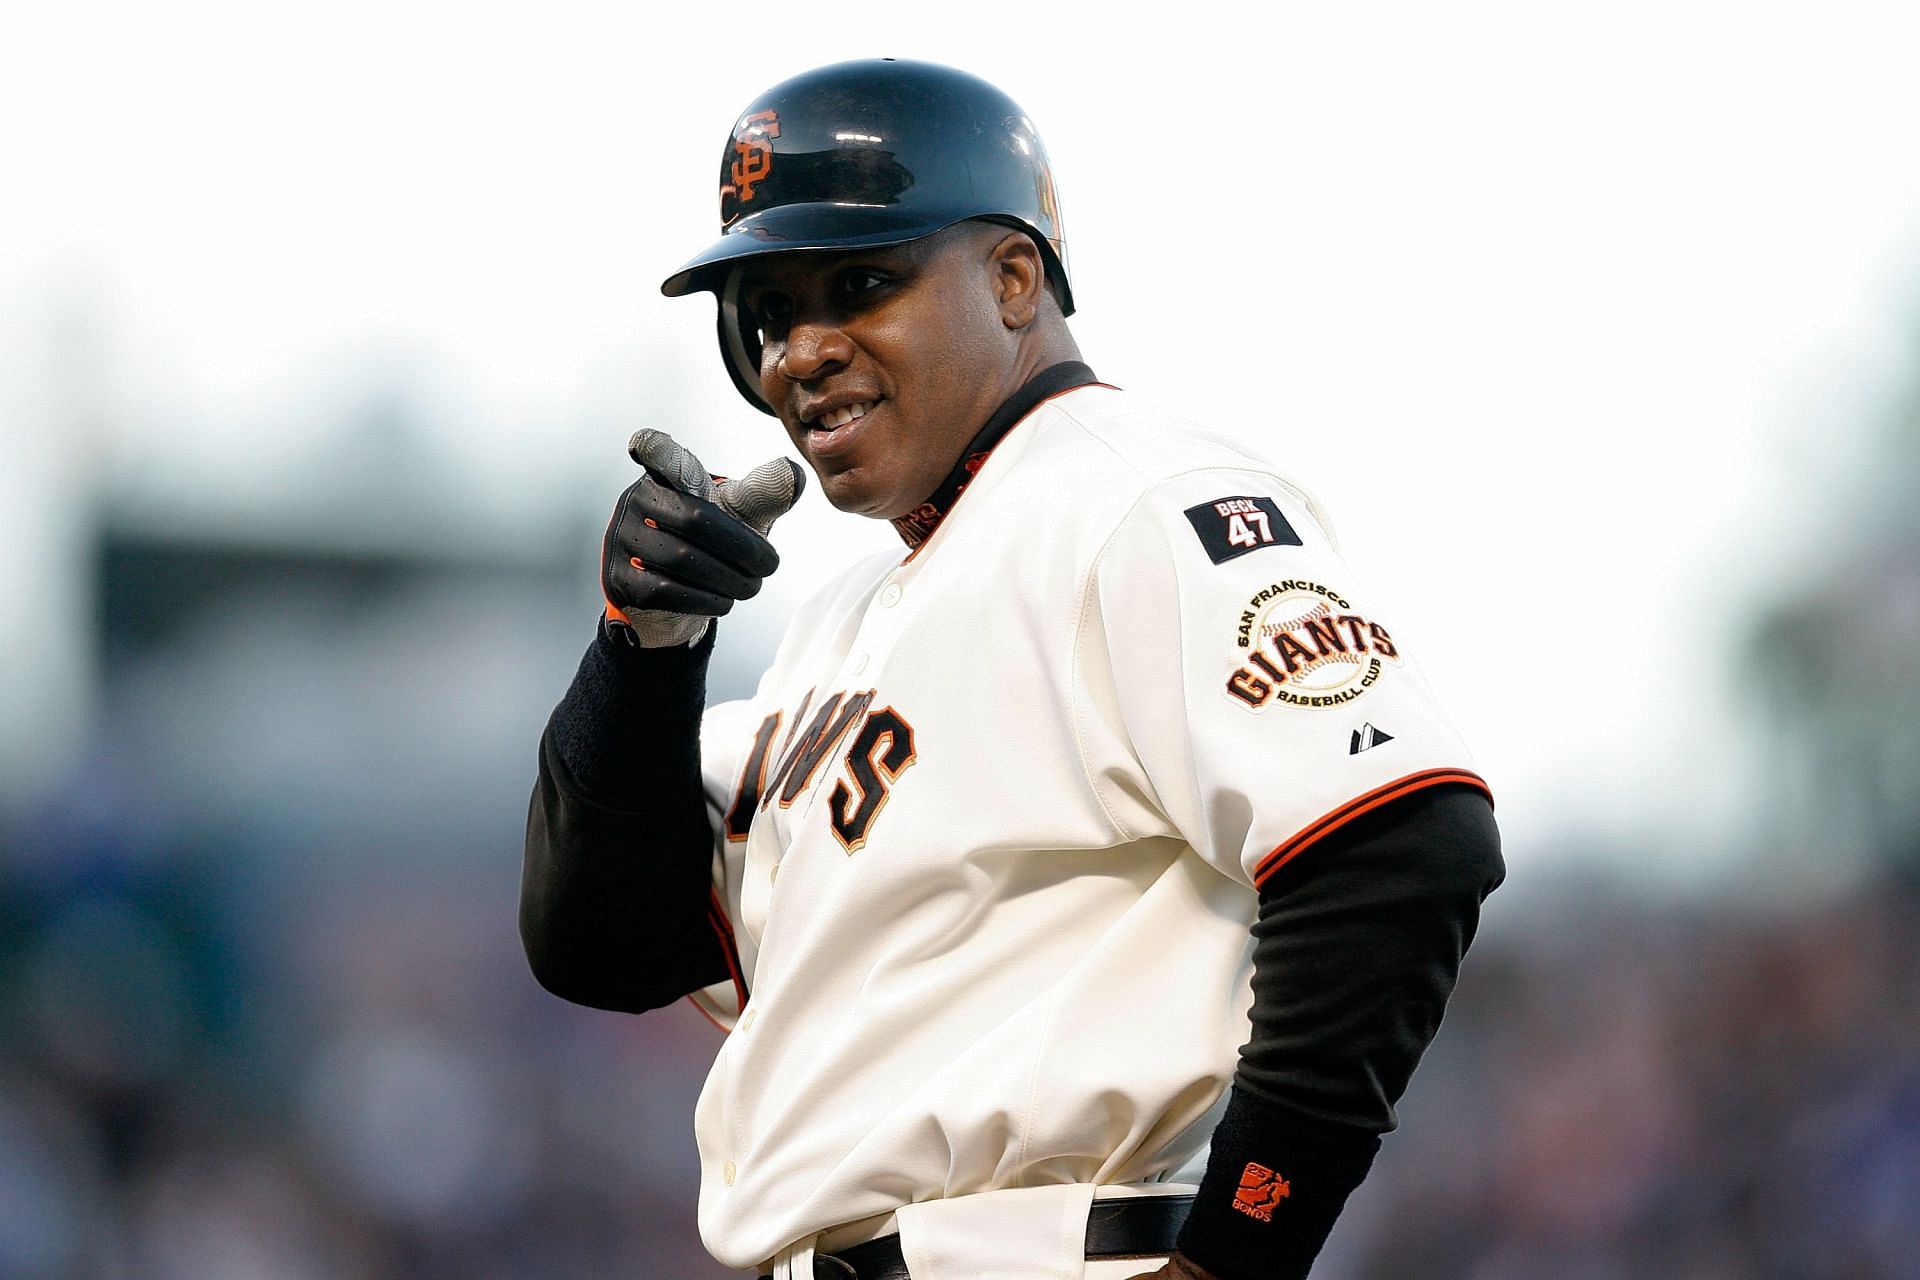 Home run king Bonds says he is rooting for Judge